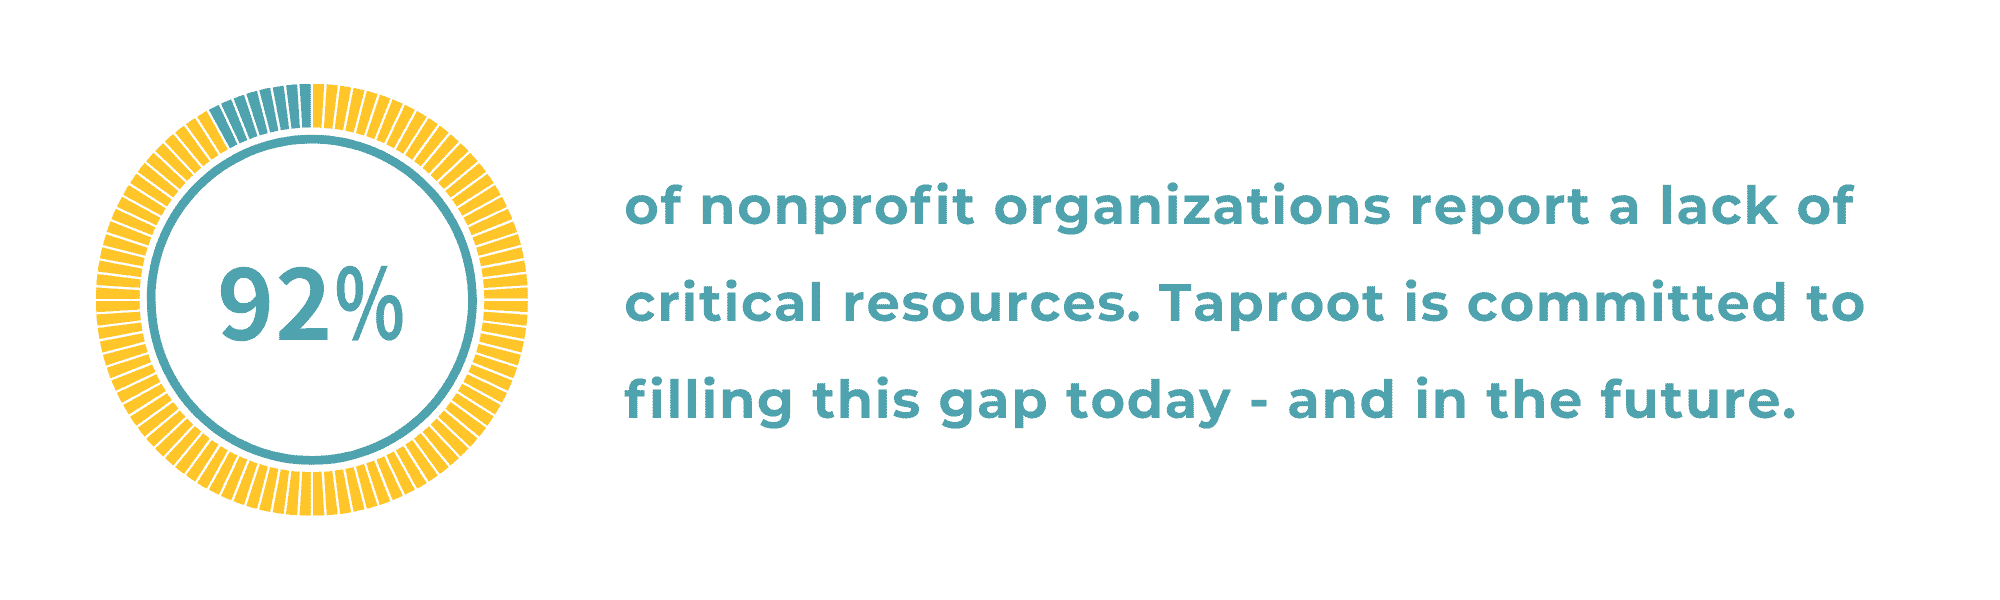 92 percent of nonprofits report a lack of critical resources. Taproot can help.